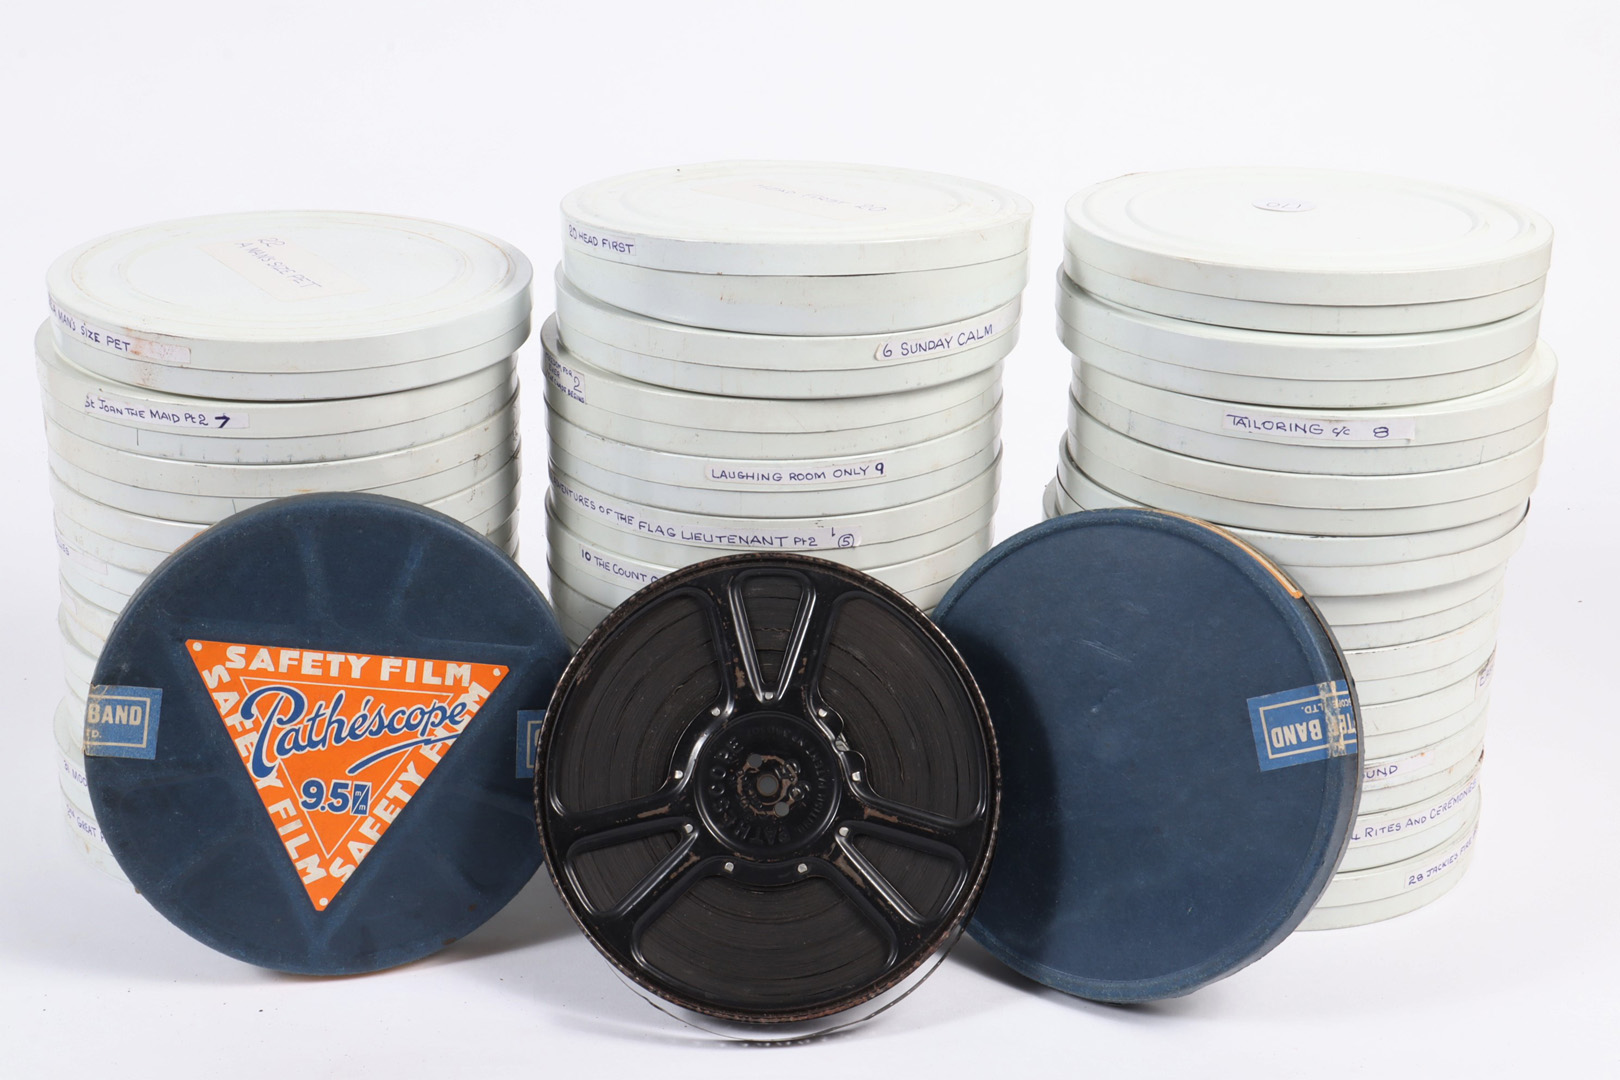 A Quantity of 9.5 Cine Films, in canisters marked with titles, Full Steam Ahead, Walters Day Out, - Image 2 of 2